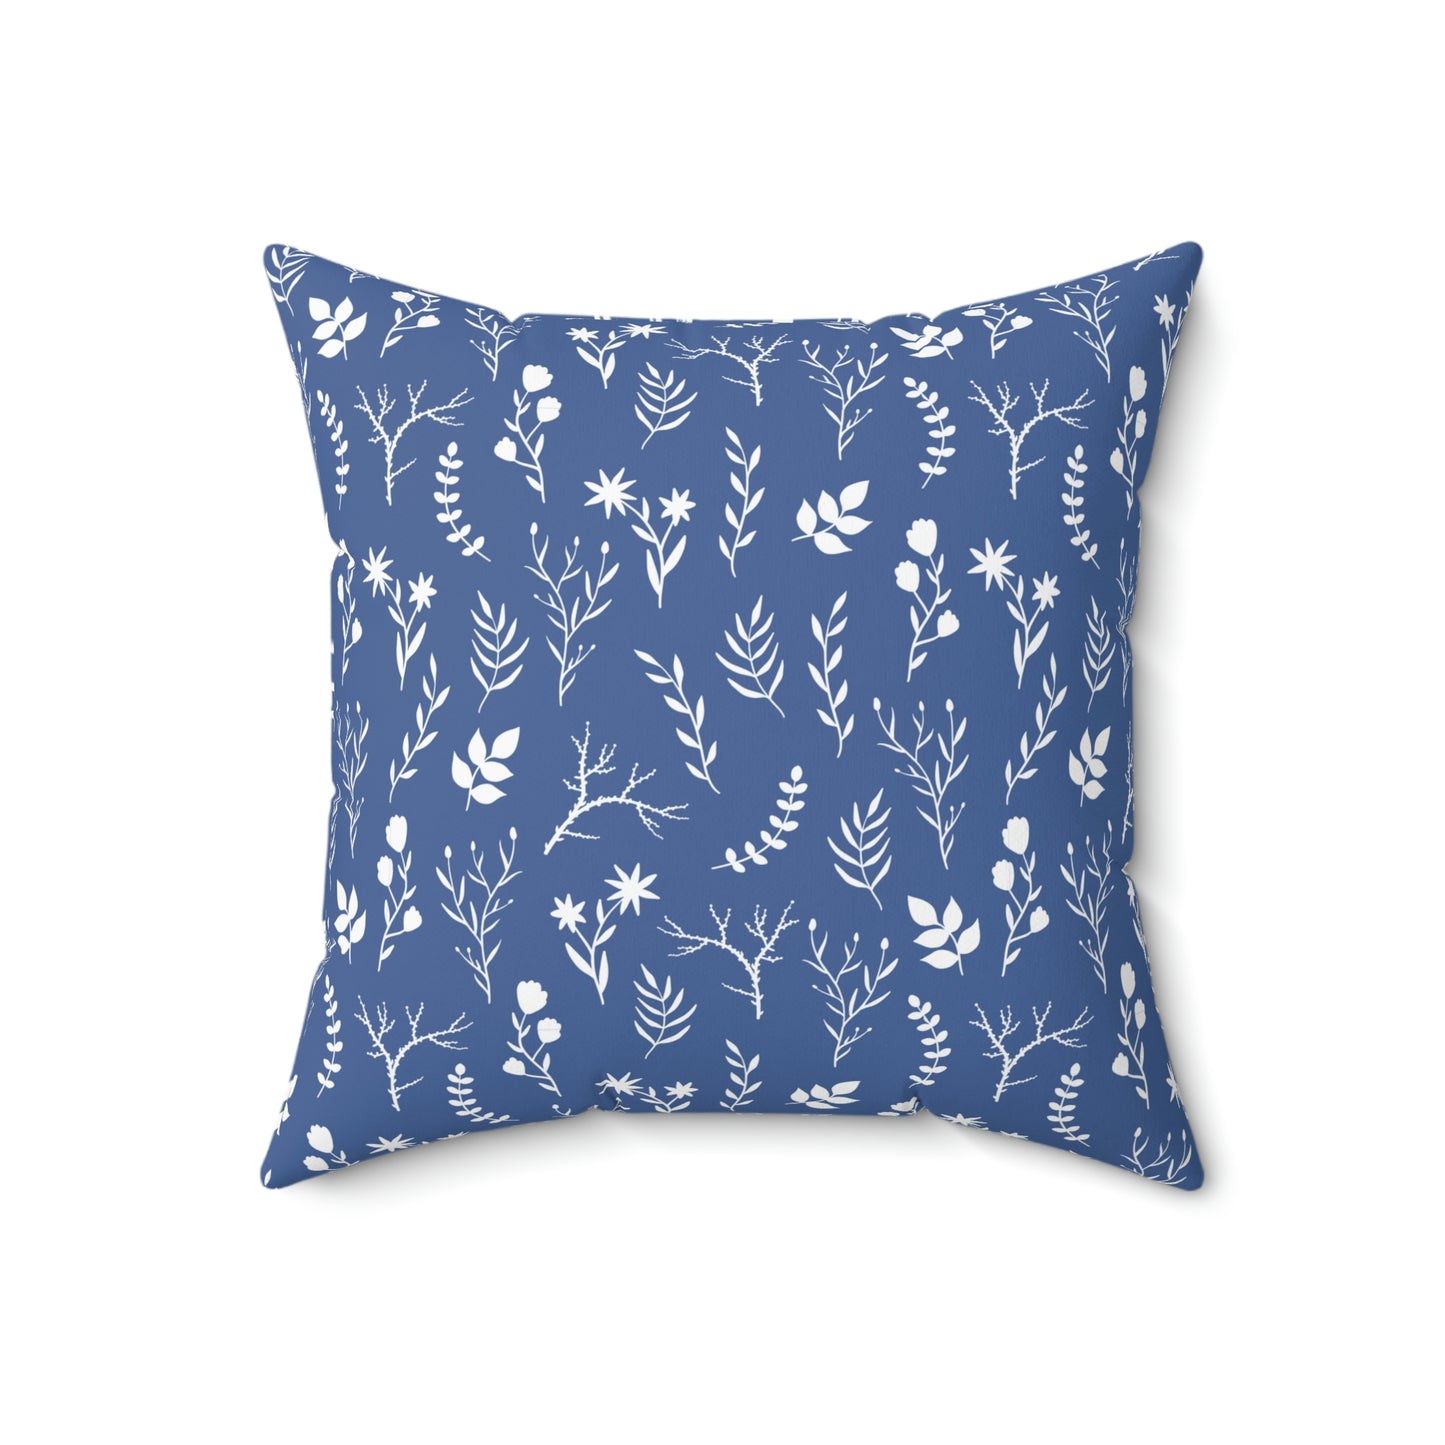 Indigo Blue and White Floral Pillow | 4 Sizes Available